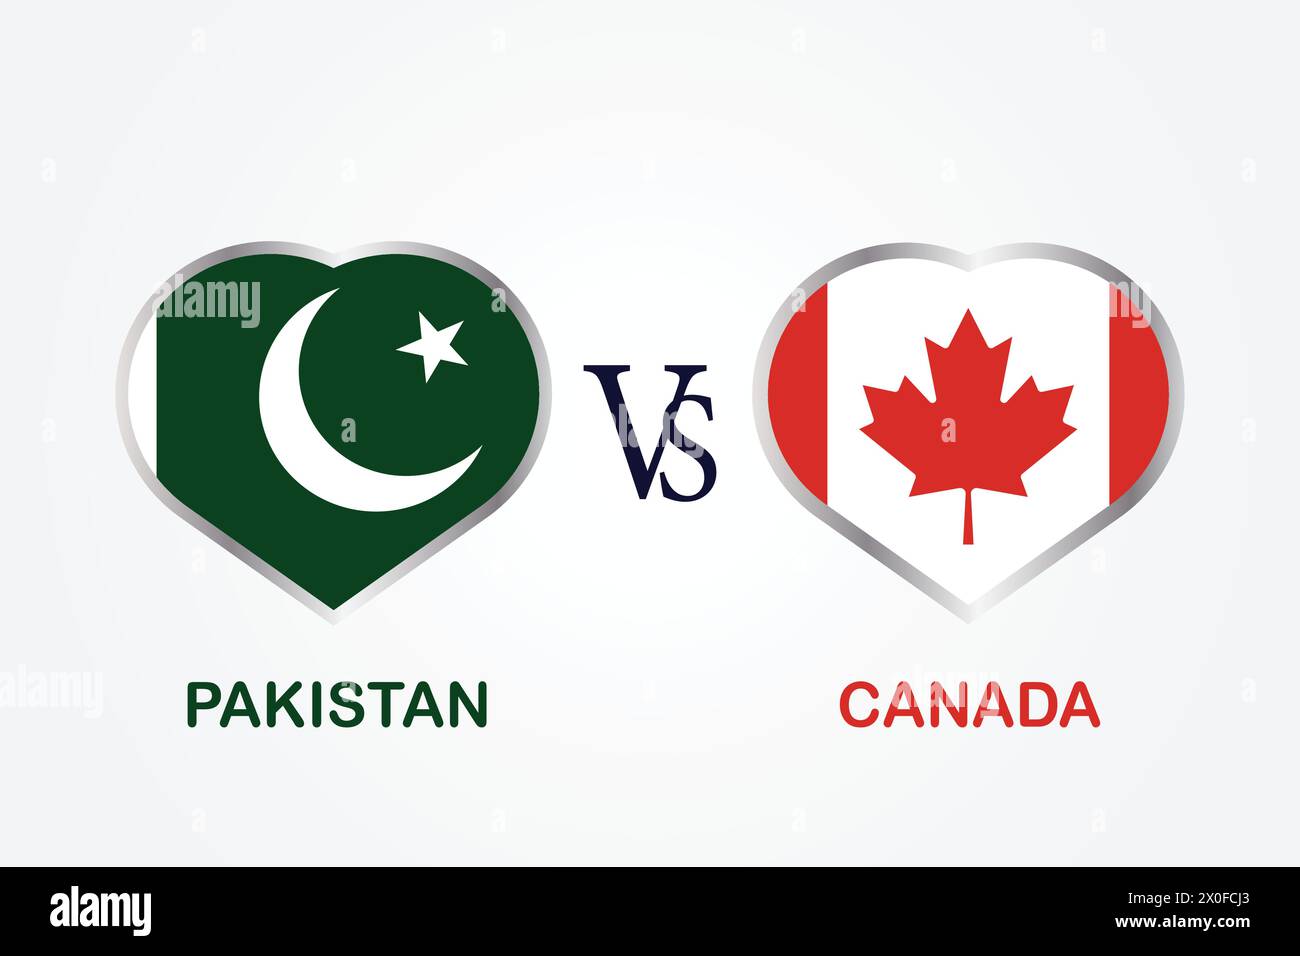 Pakistan Vs Canada, Cricket Match concept with creative illustration of participant countries flag Batsman and Hearts isolated on white background Stock Vector